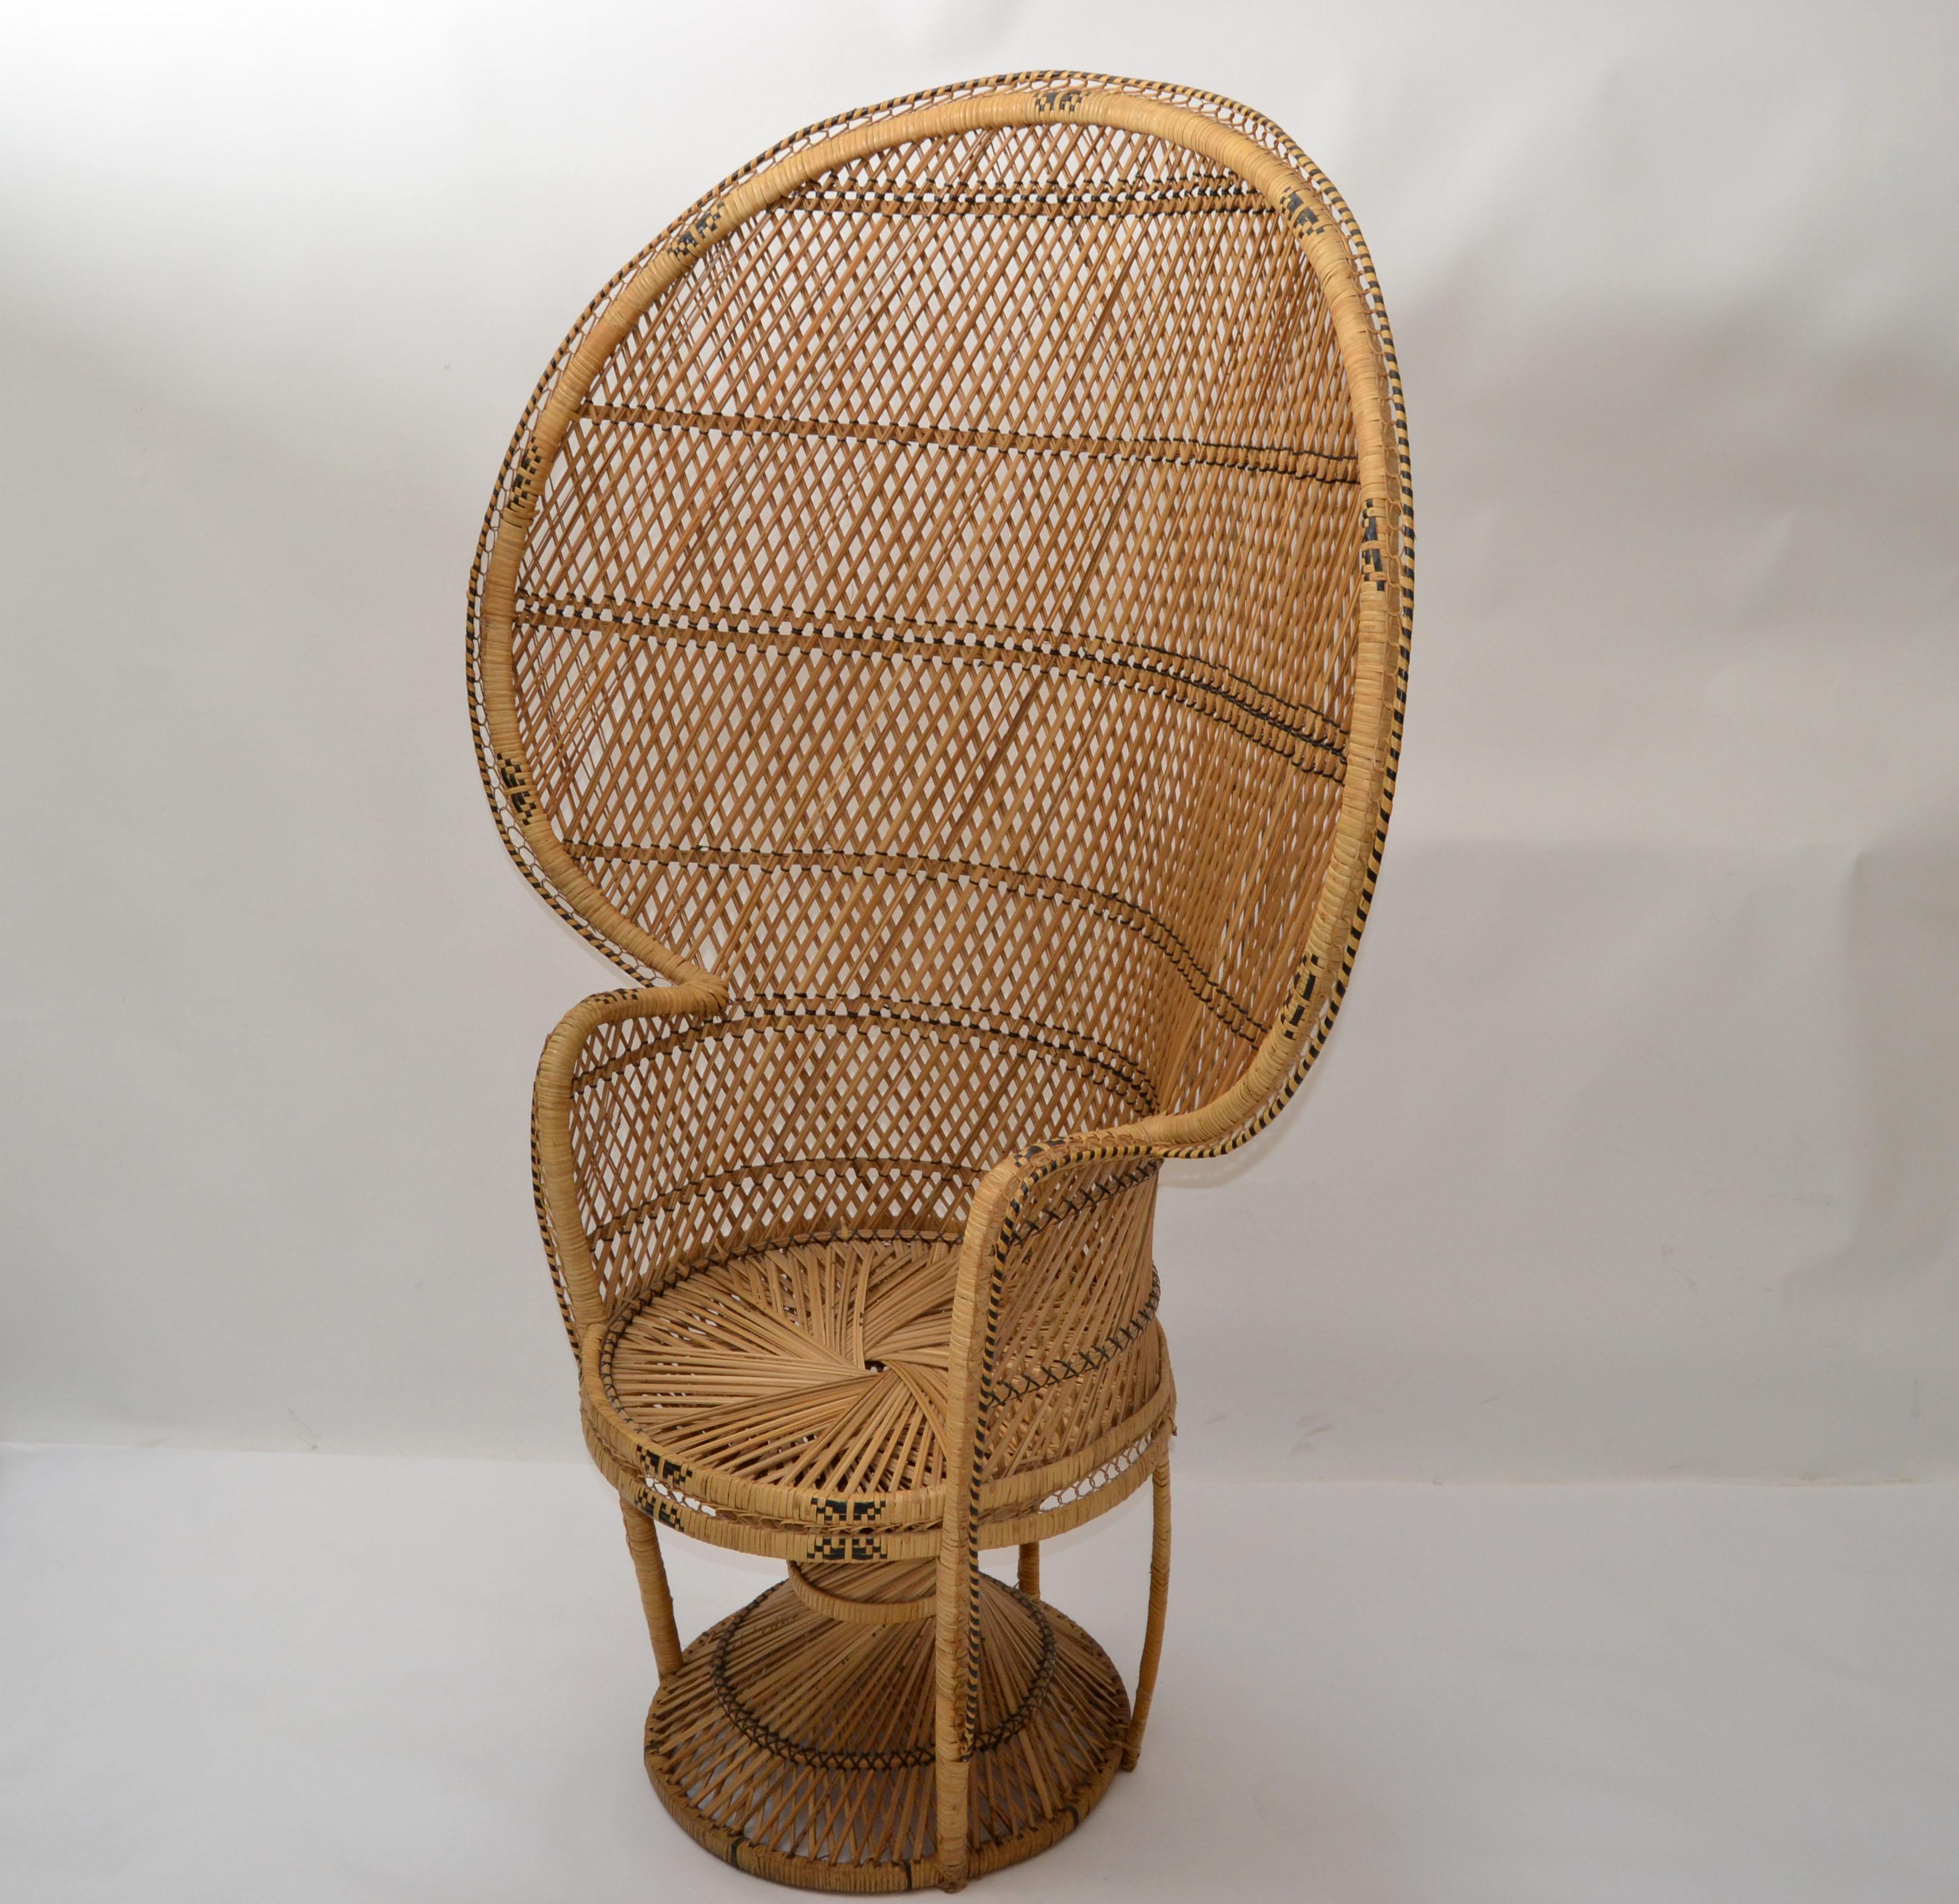 Stunning Boho Chic handwoven vintage Beige and black peacock chair from the 1970s.
Please note the details and different techniques in this chair. 
Made out of wicker, rattan and reed.
Great for indoor and outdoor use.
Arm Height: 28.5 inches.